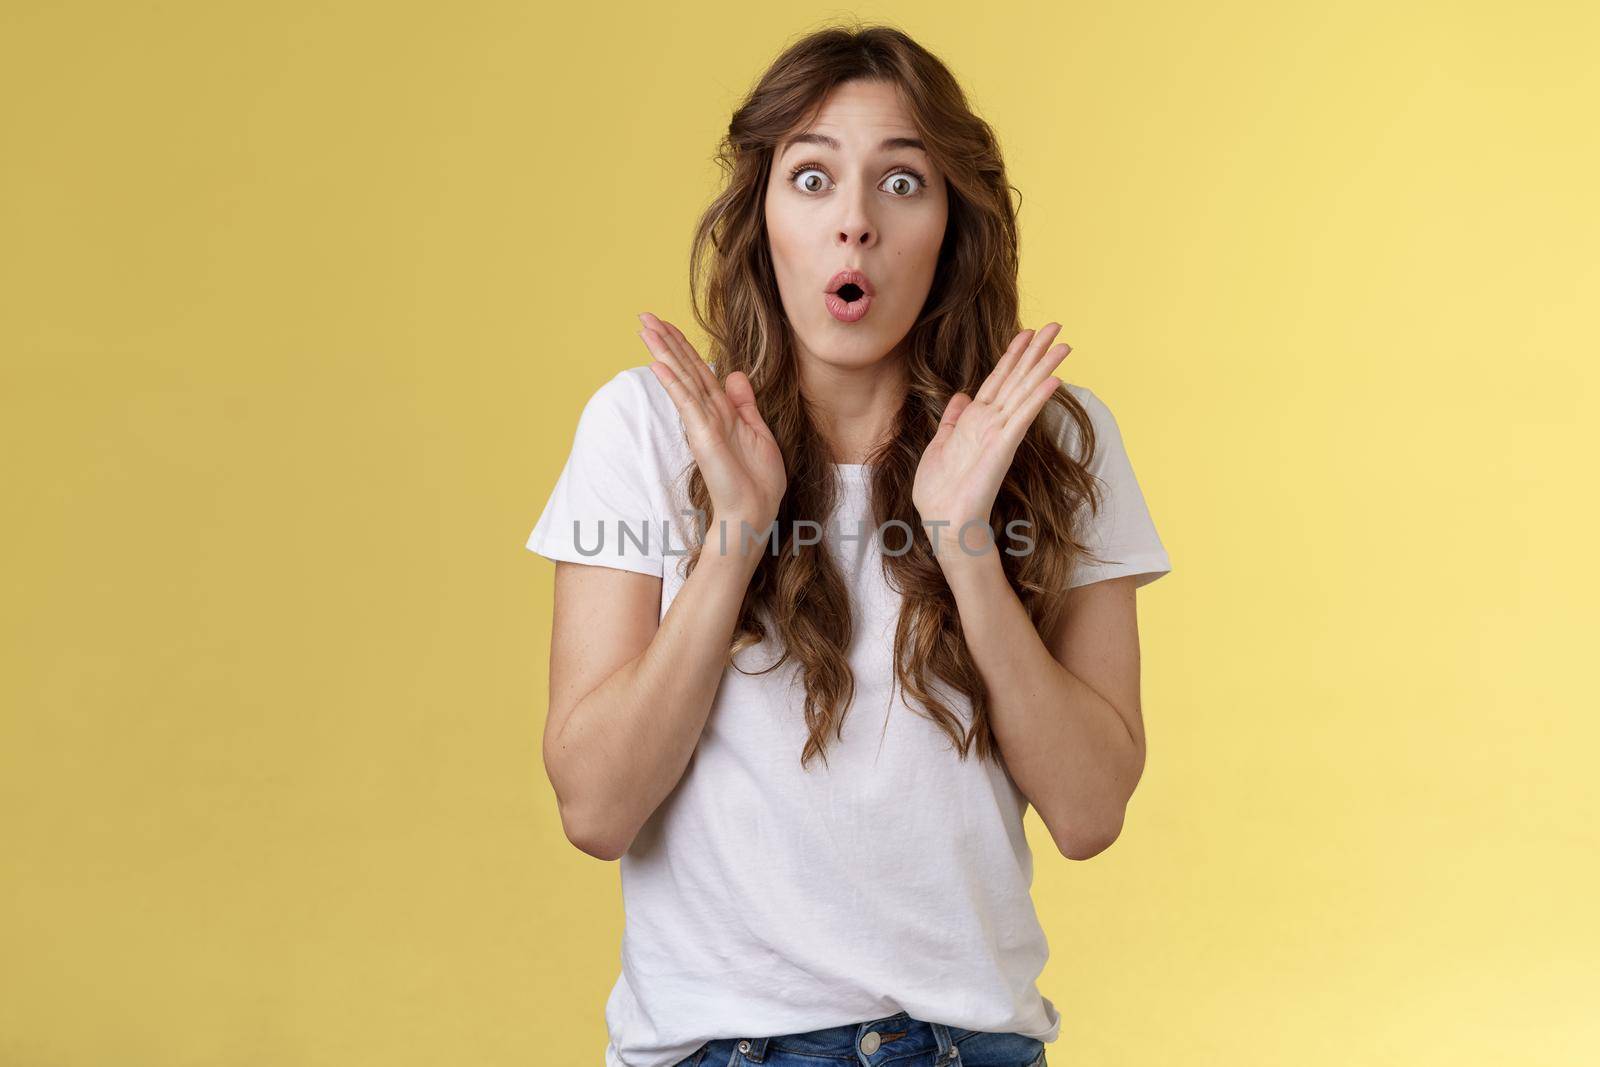 Shocked impressed surprised girl learn interesting pleasant good news clap hands open mouth fold lips wow gasping stare intrigued enthusiastic reaction awesome performance yellow background.